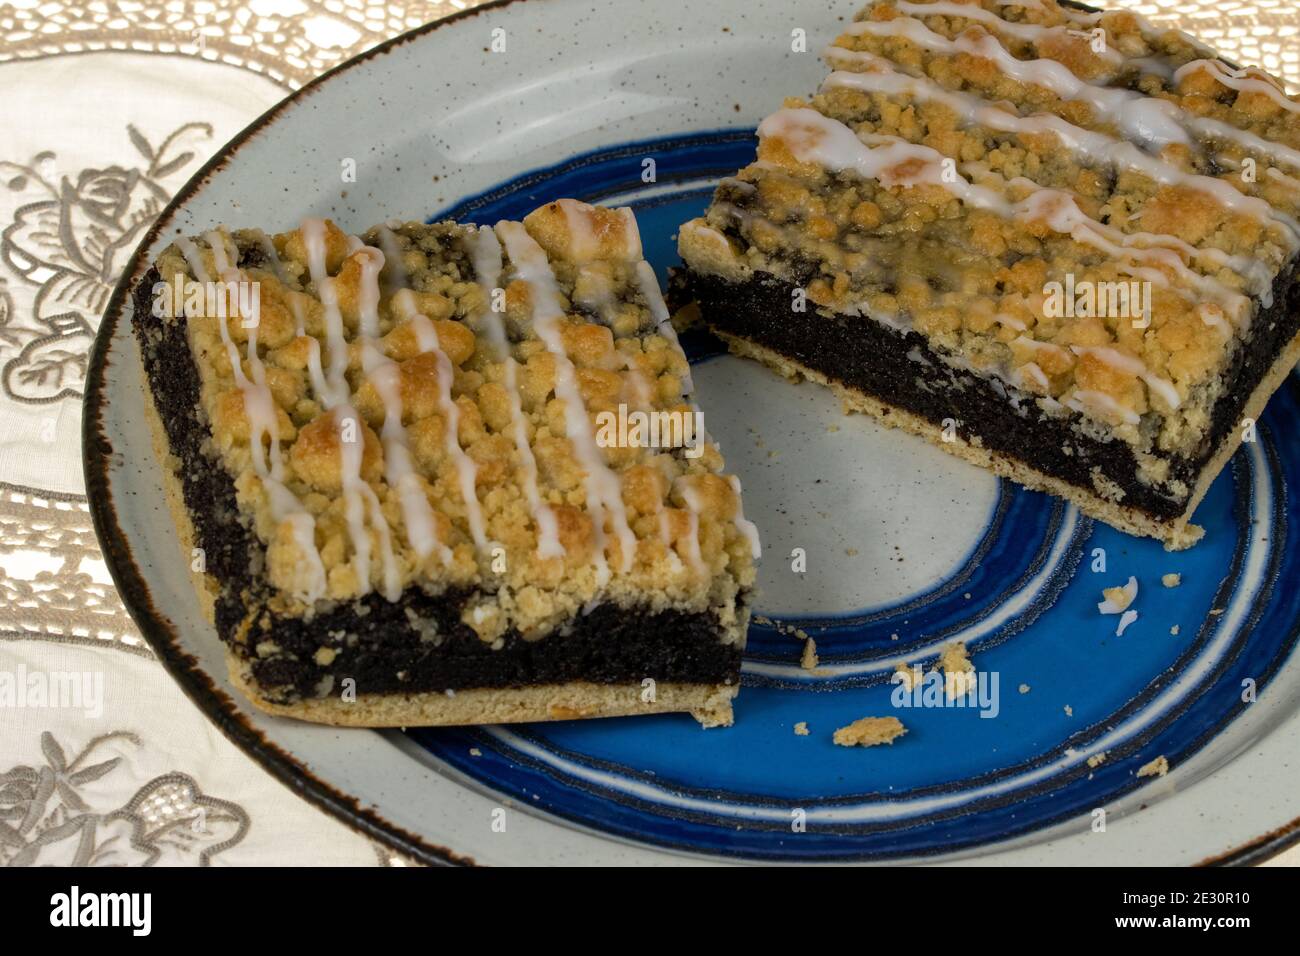 Silesian poppy seed cake with yeast dough. An old recipe from my grandma. Stock Photo